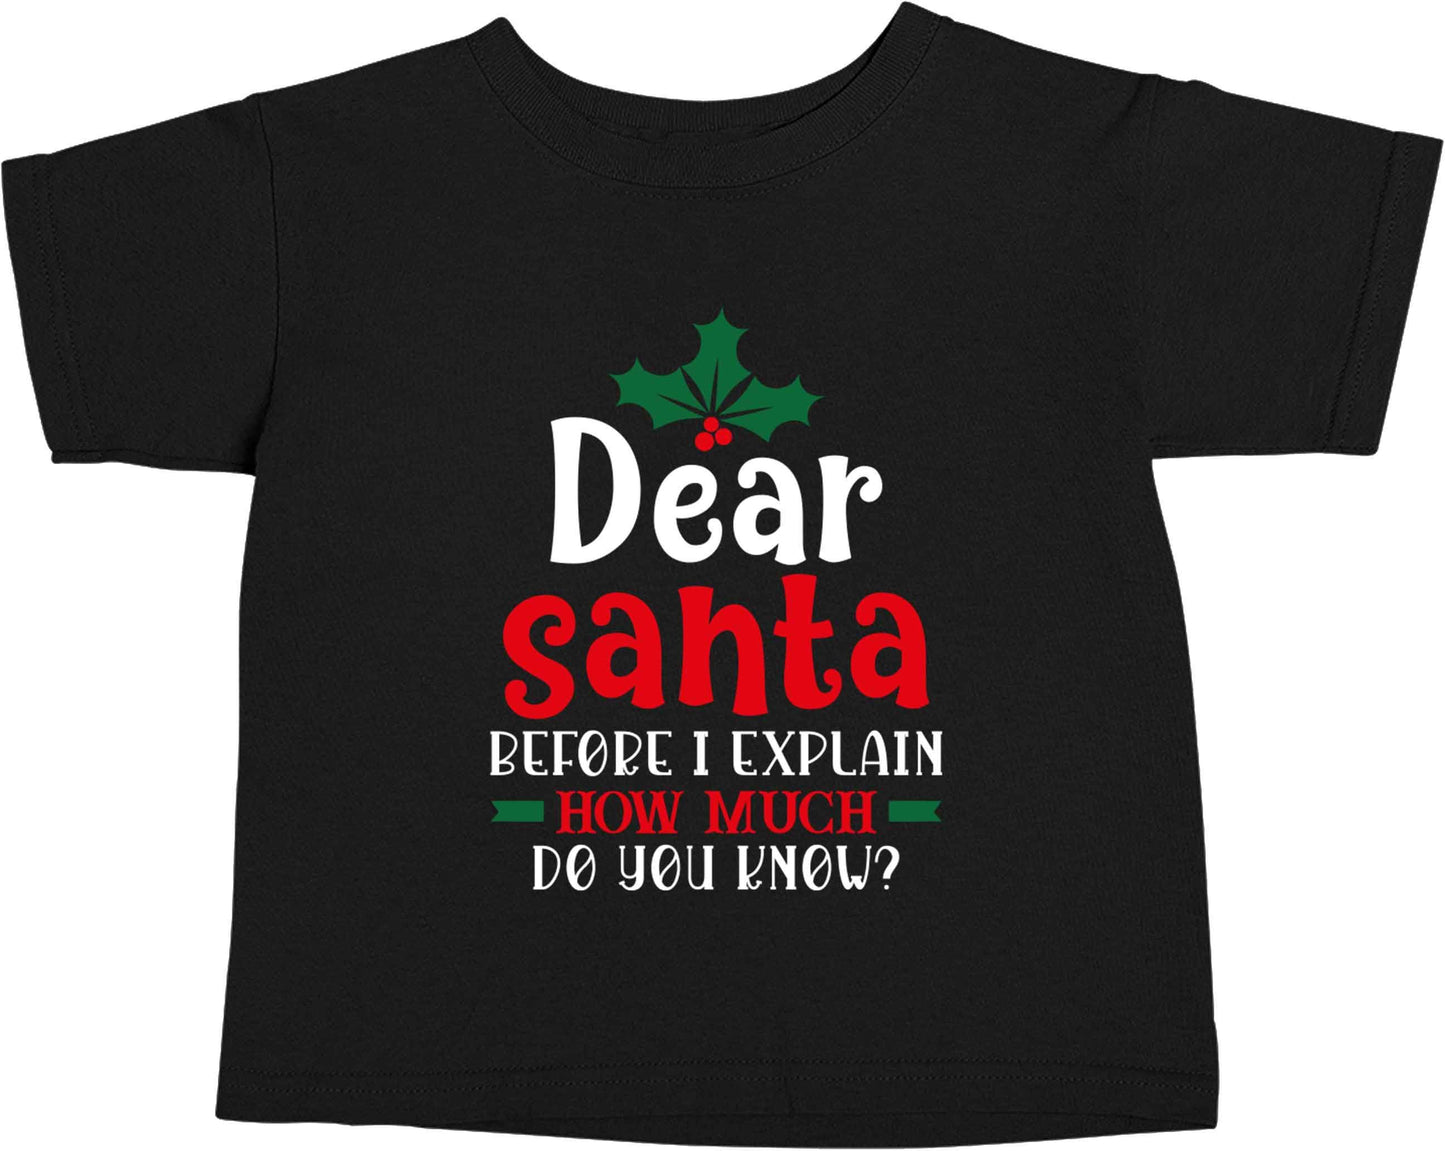 Santa before I explain how much do you know? Black baby toddler Tshirt 2 years